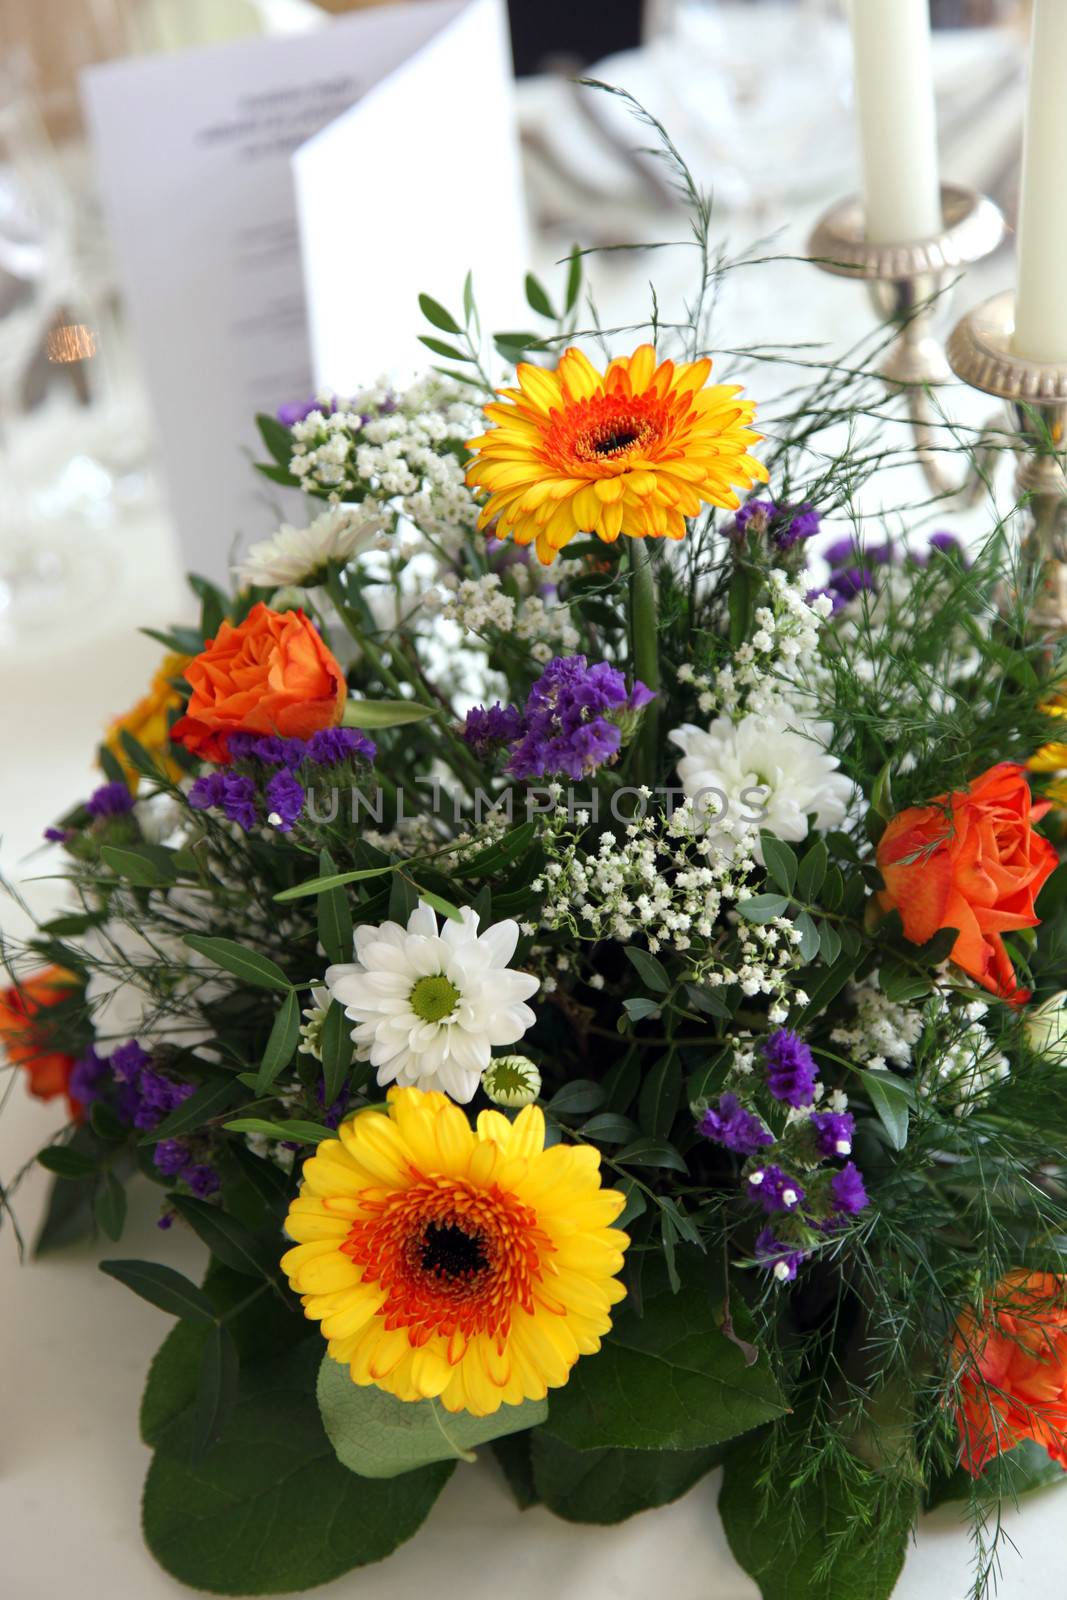 Colorful flower centerpiece on a table set for a formal meal